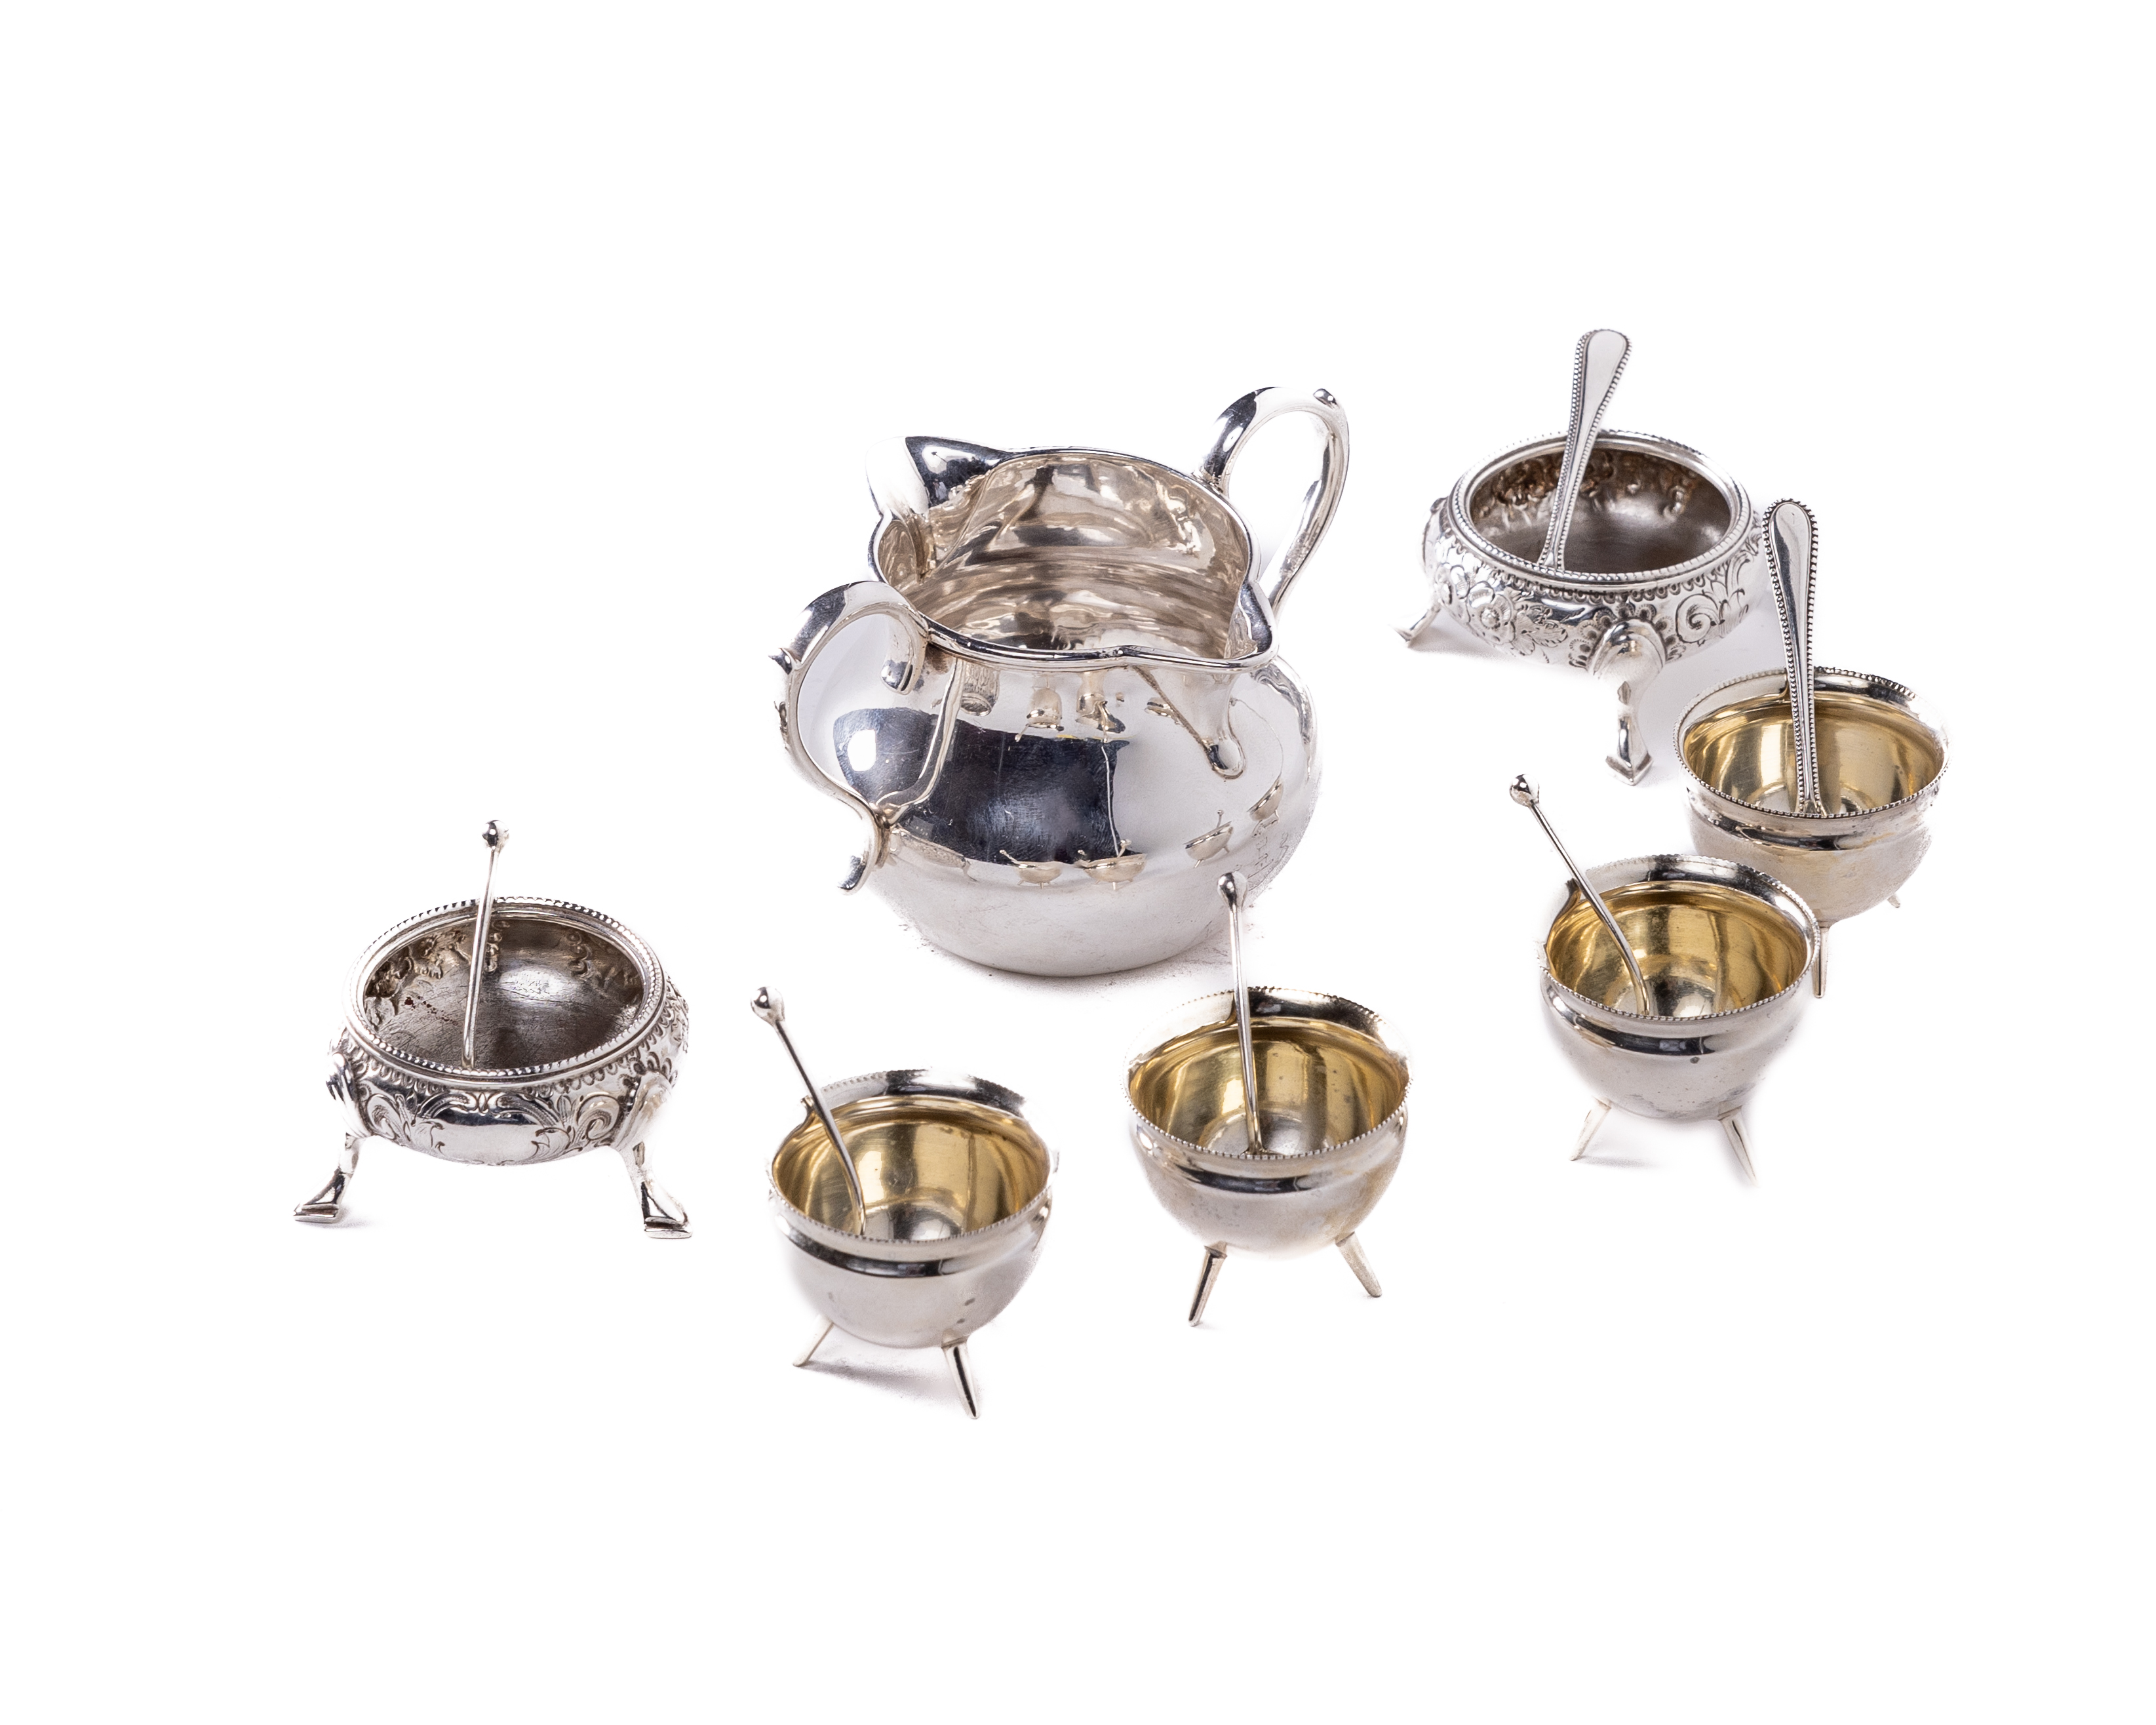 Silverware: A set of four unusual skillet design silver Salts, by Mappin & Webb, London, with